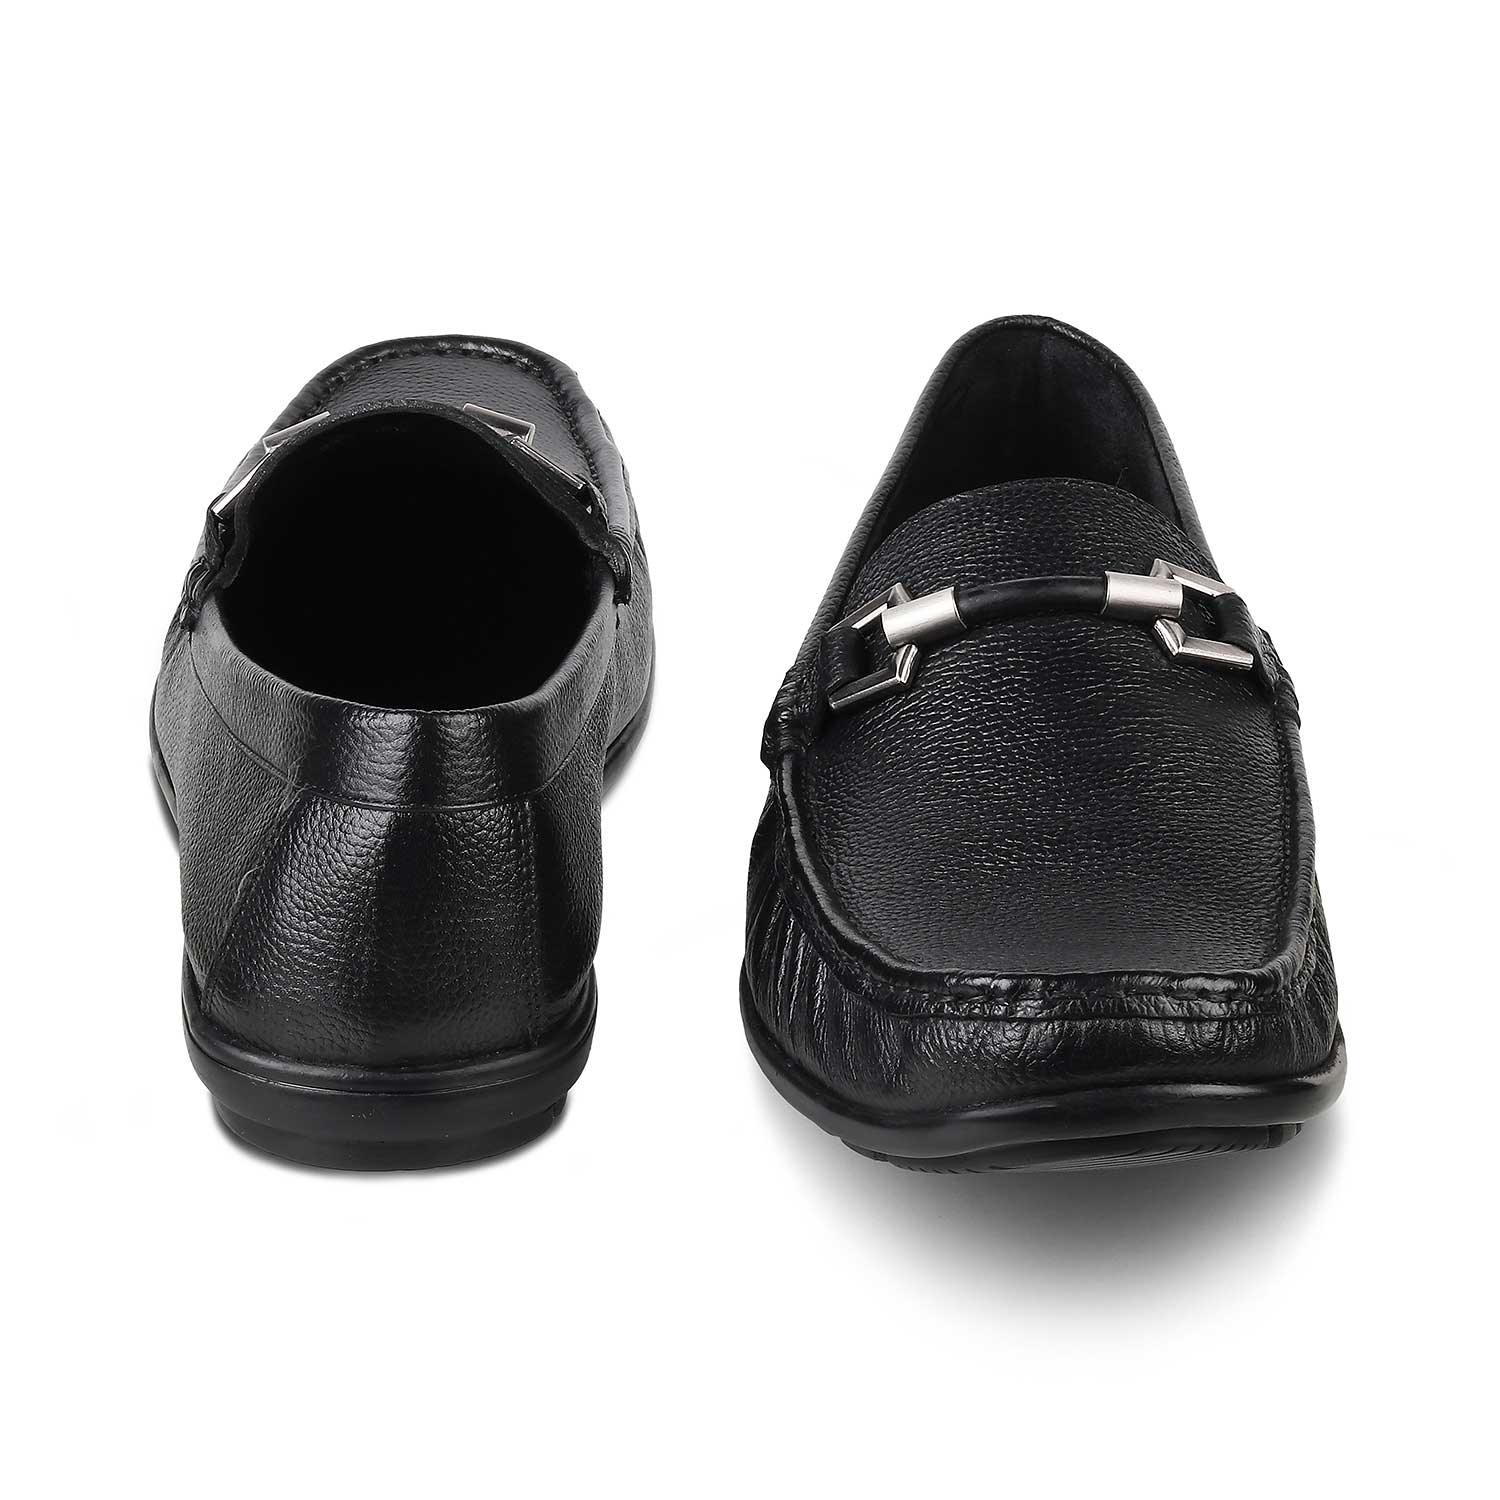 The Uffizi Black Men's Leather Loafers Tresmode - Tresmode